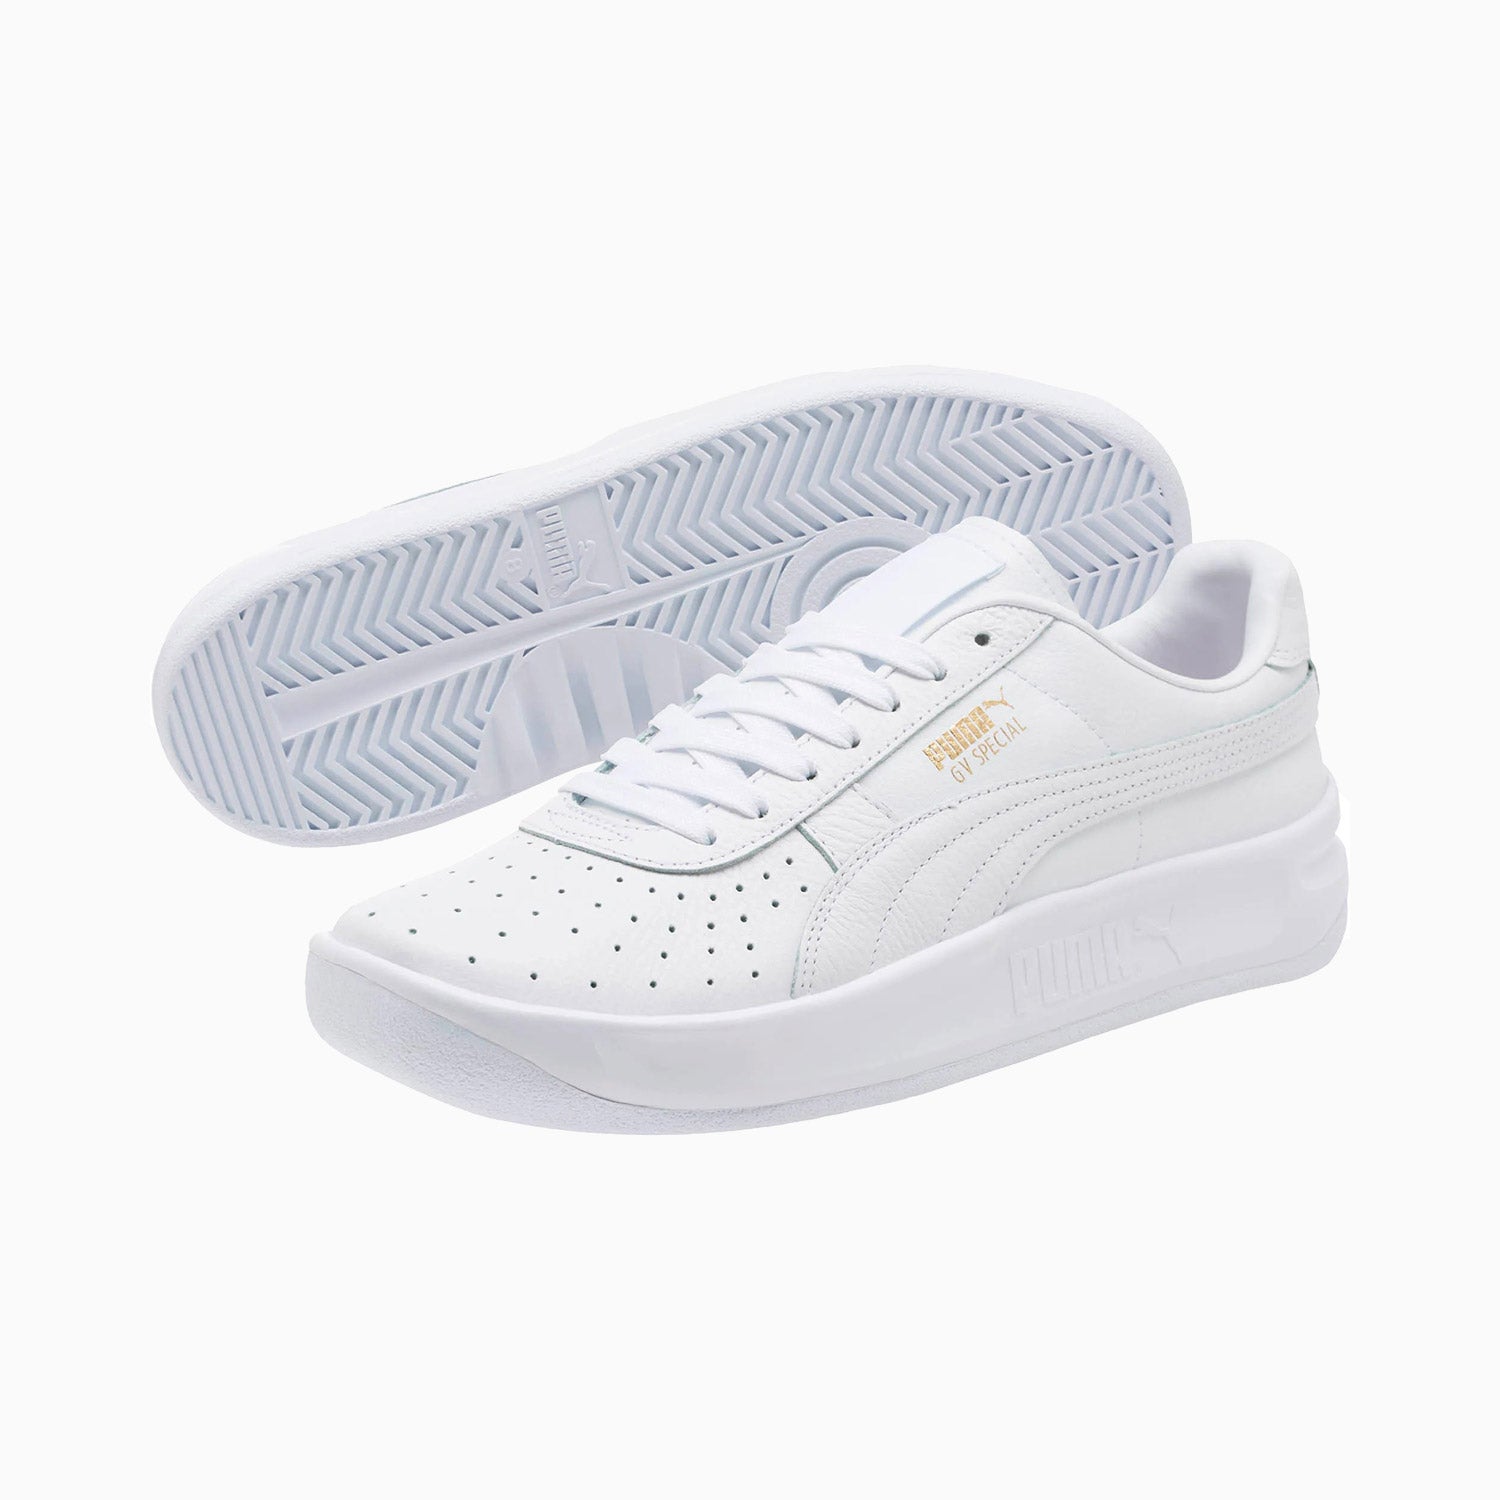 Puma Men's GV Special+ - Color: White - Tops and Bottoms USA -